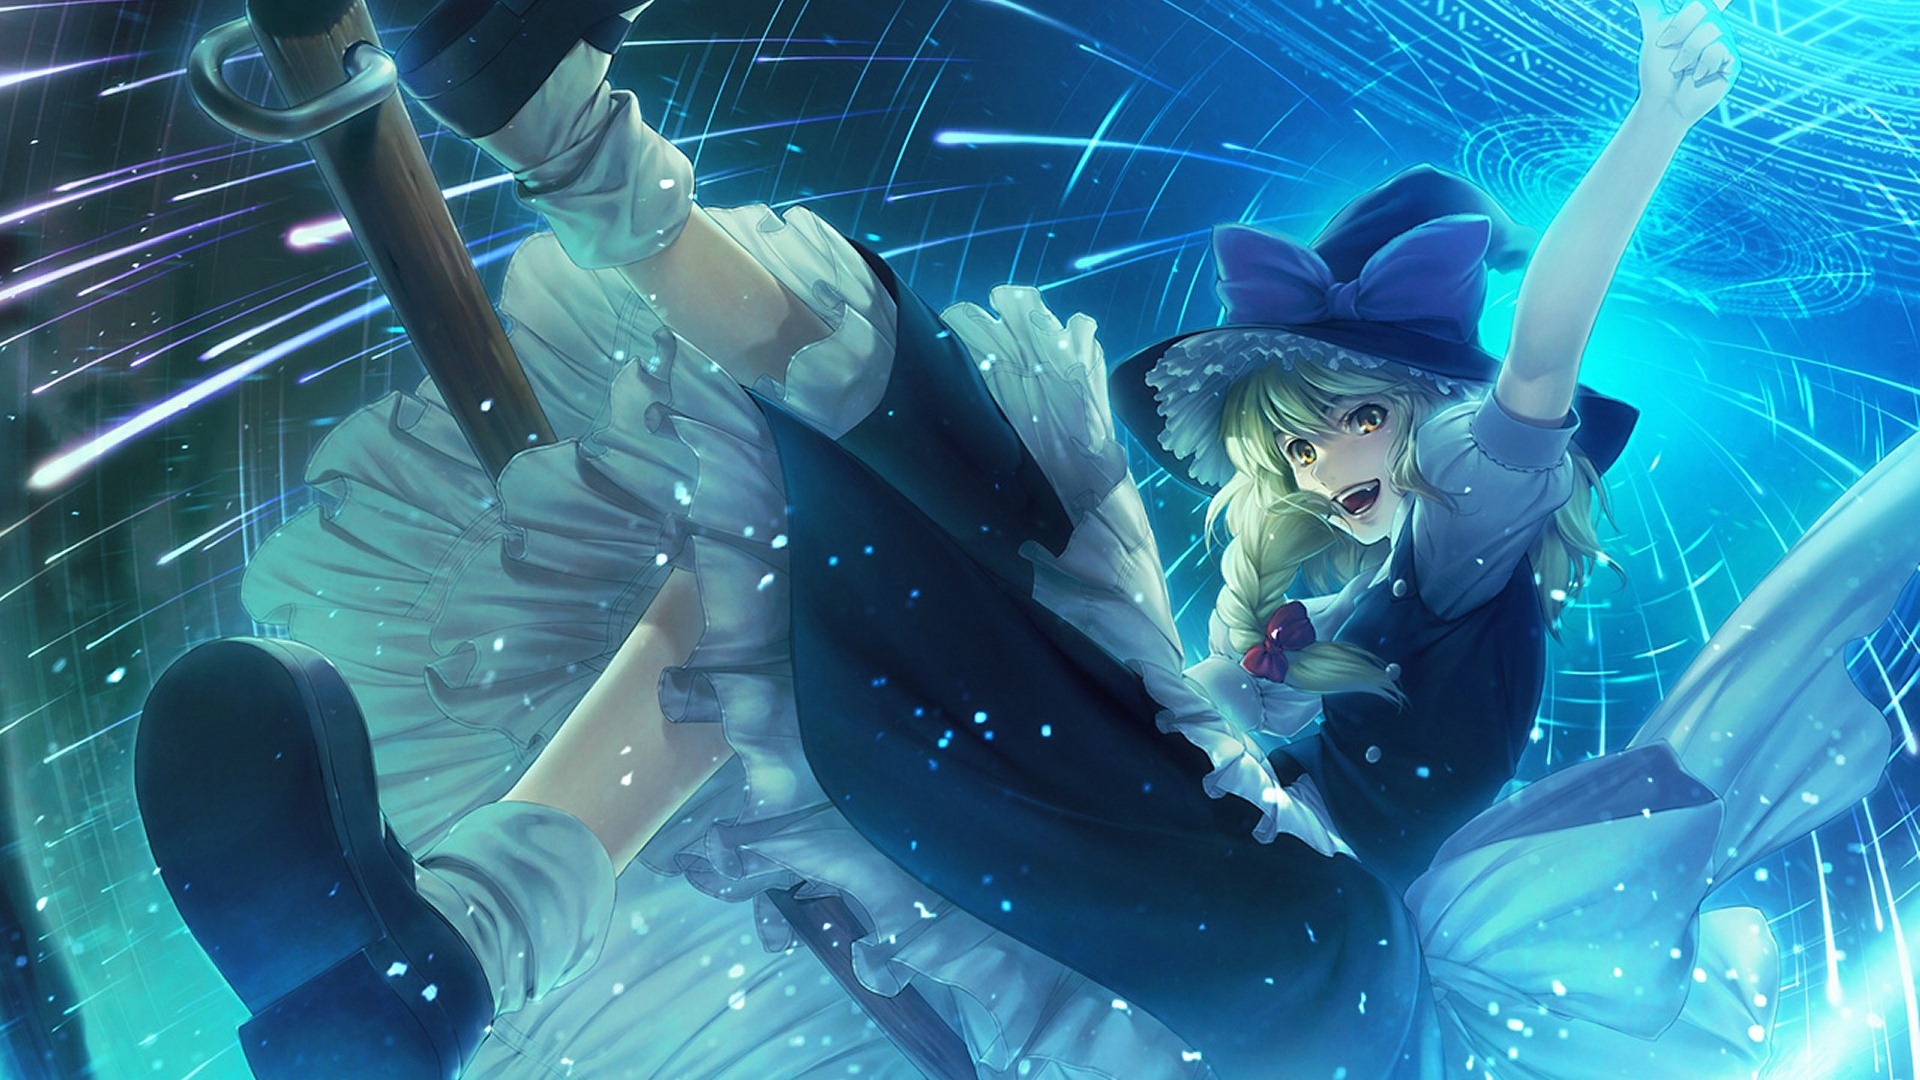 Touhou Project caricature HD wallpapers #18 - 1920x1080